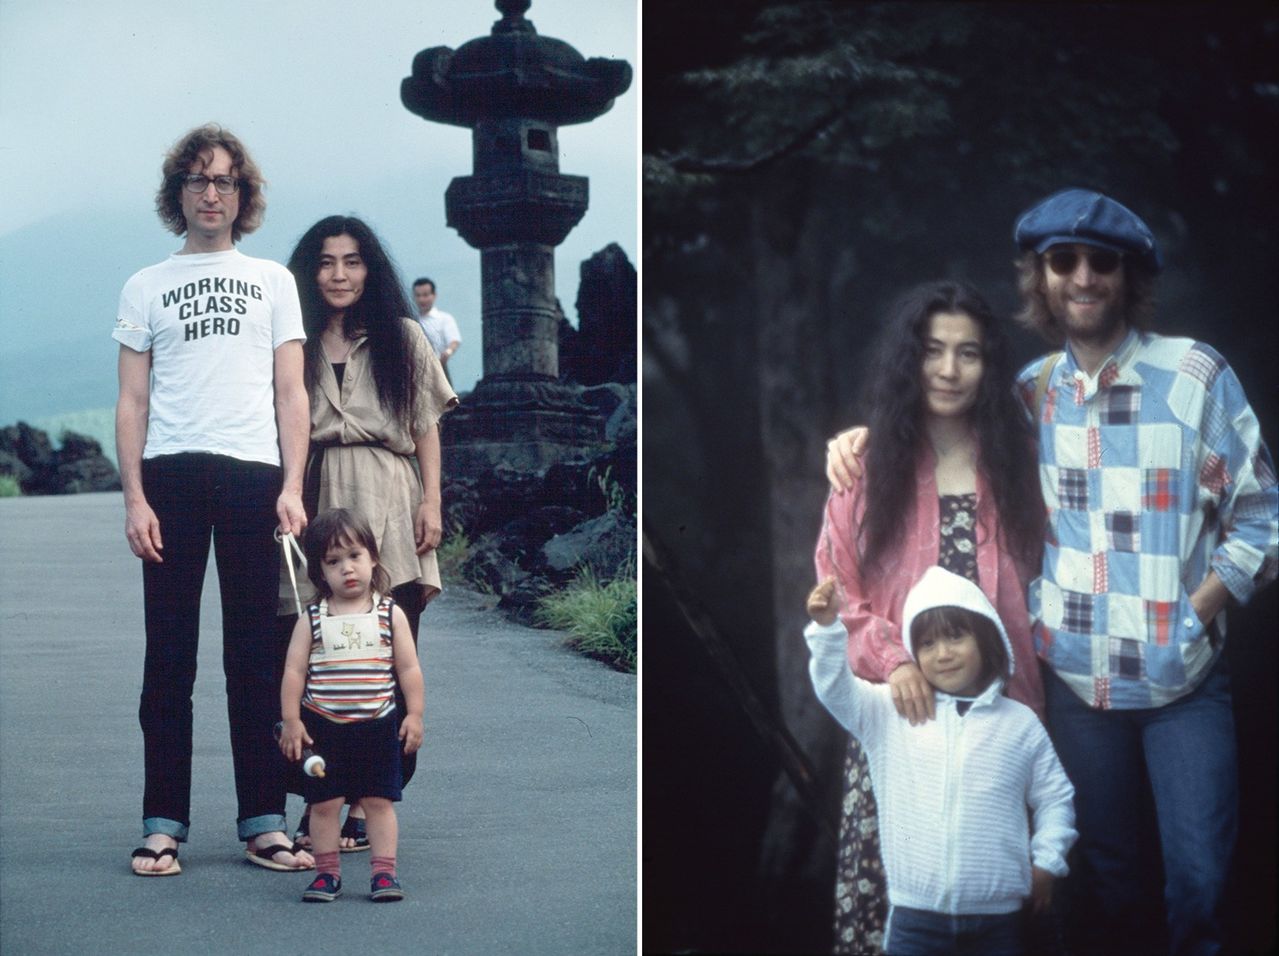 John Lennon, Ono Yōko, and Sean Ono Lennon on holiday in Japan in the summer of 1977 (left) (photo by Nishi F. Saimaru; © Yoko Ono) and the family in Karuizawa, Nagano Prefecture, in 1979 (photo by Nishi F. Saimaru; © Nishi F. Saimaru & © Yoko Ono). (Courtesy the Double Fantasy: John & Yoko exhibition in Tokyo)